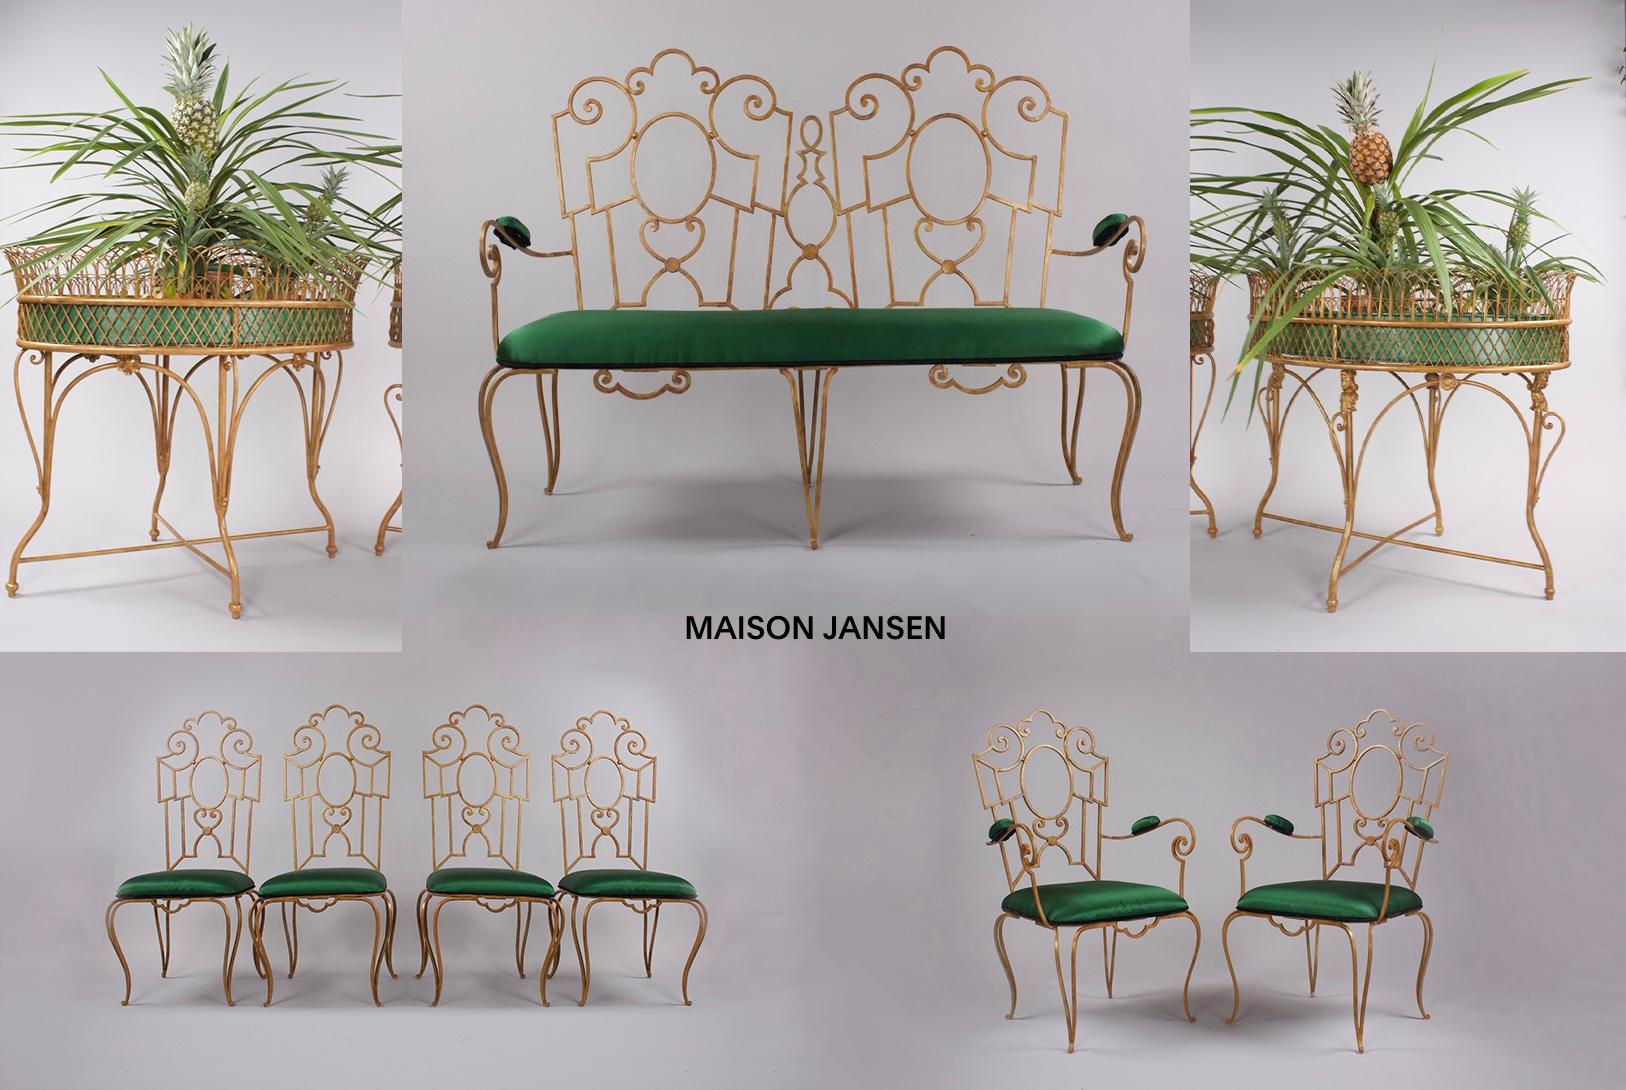 MAISON JANSEN

…From a villa decorated by Jansen around 1940 in the south of France…

Suite of:
- 1 settee; 
- H 108cm(42“) H assise 43cm(17